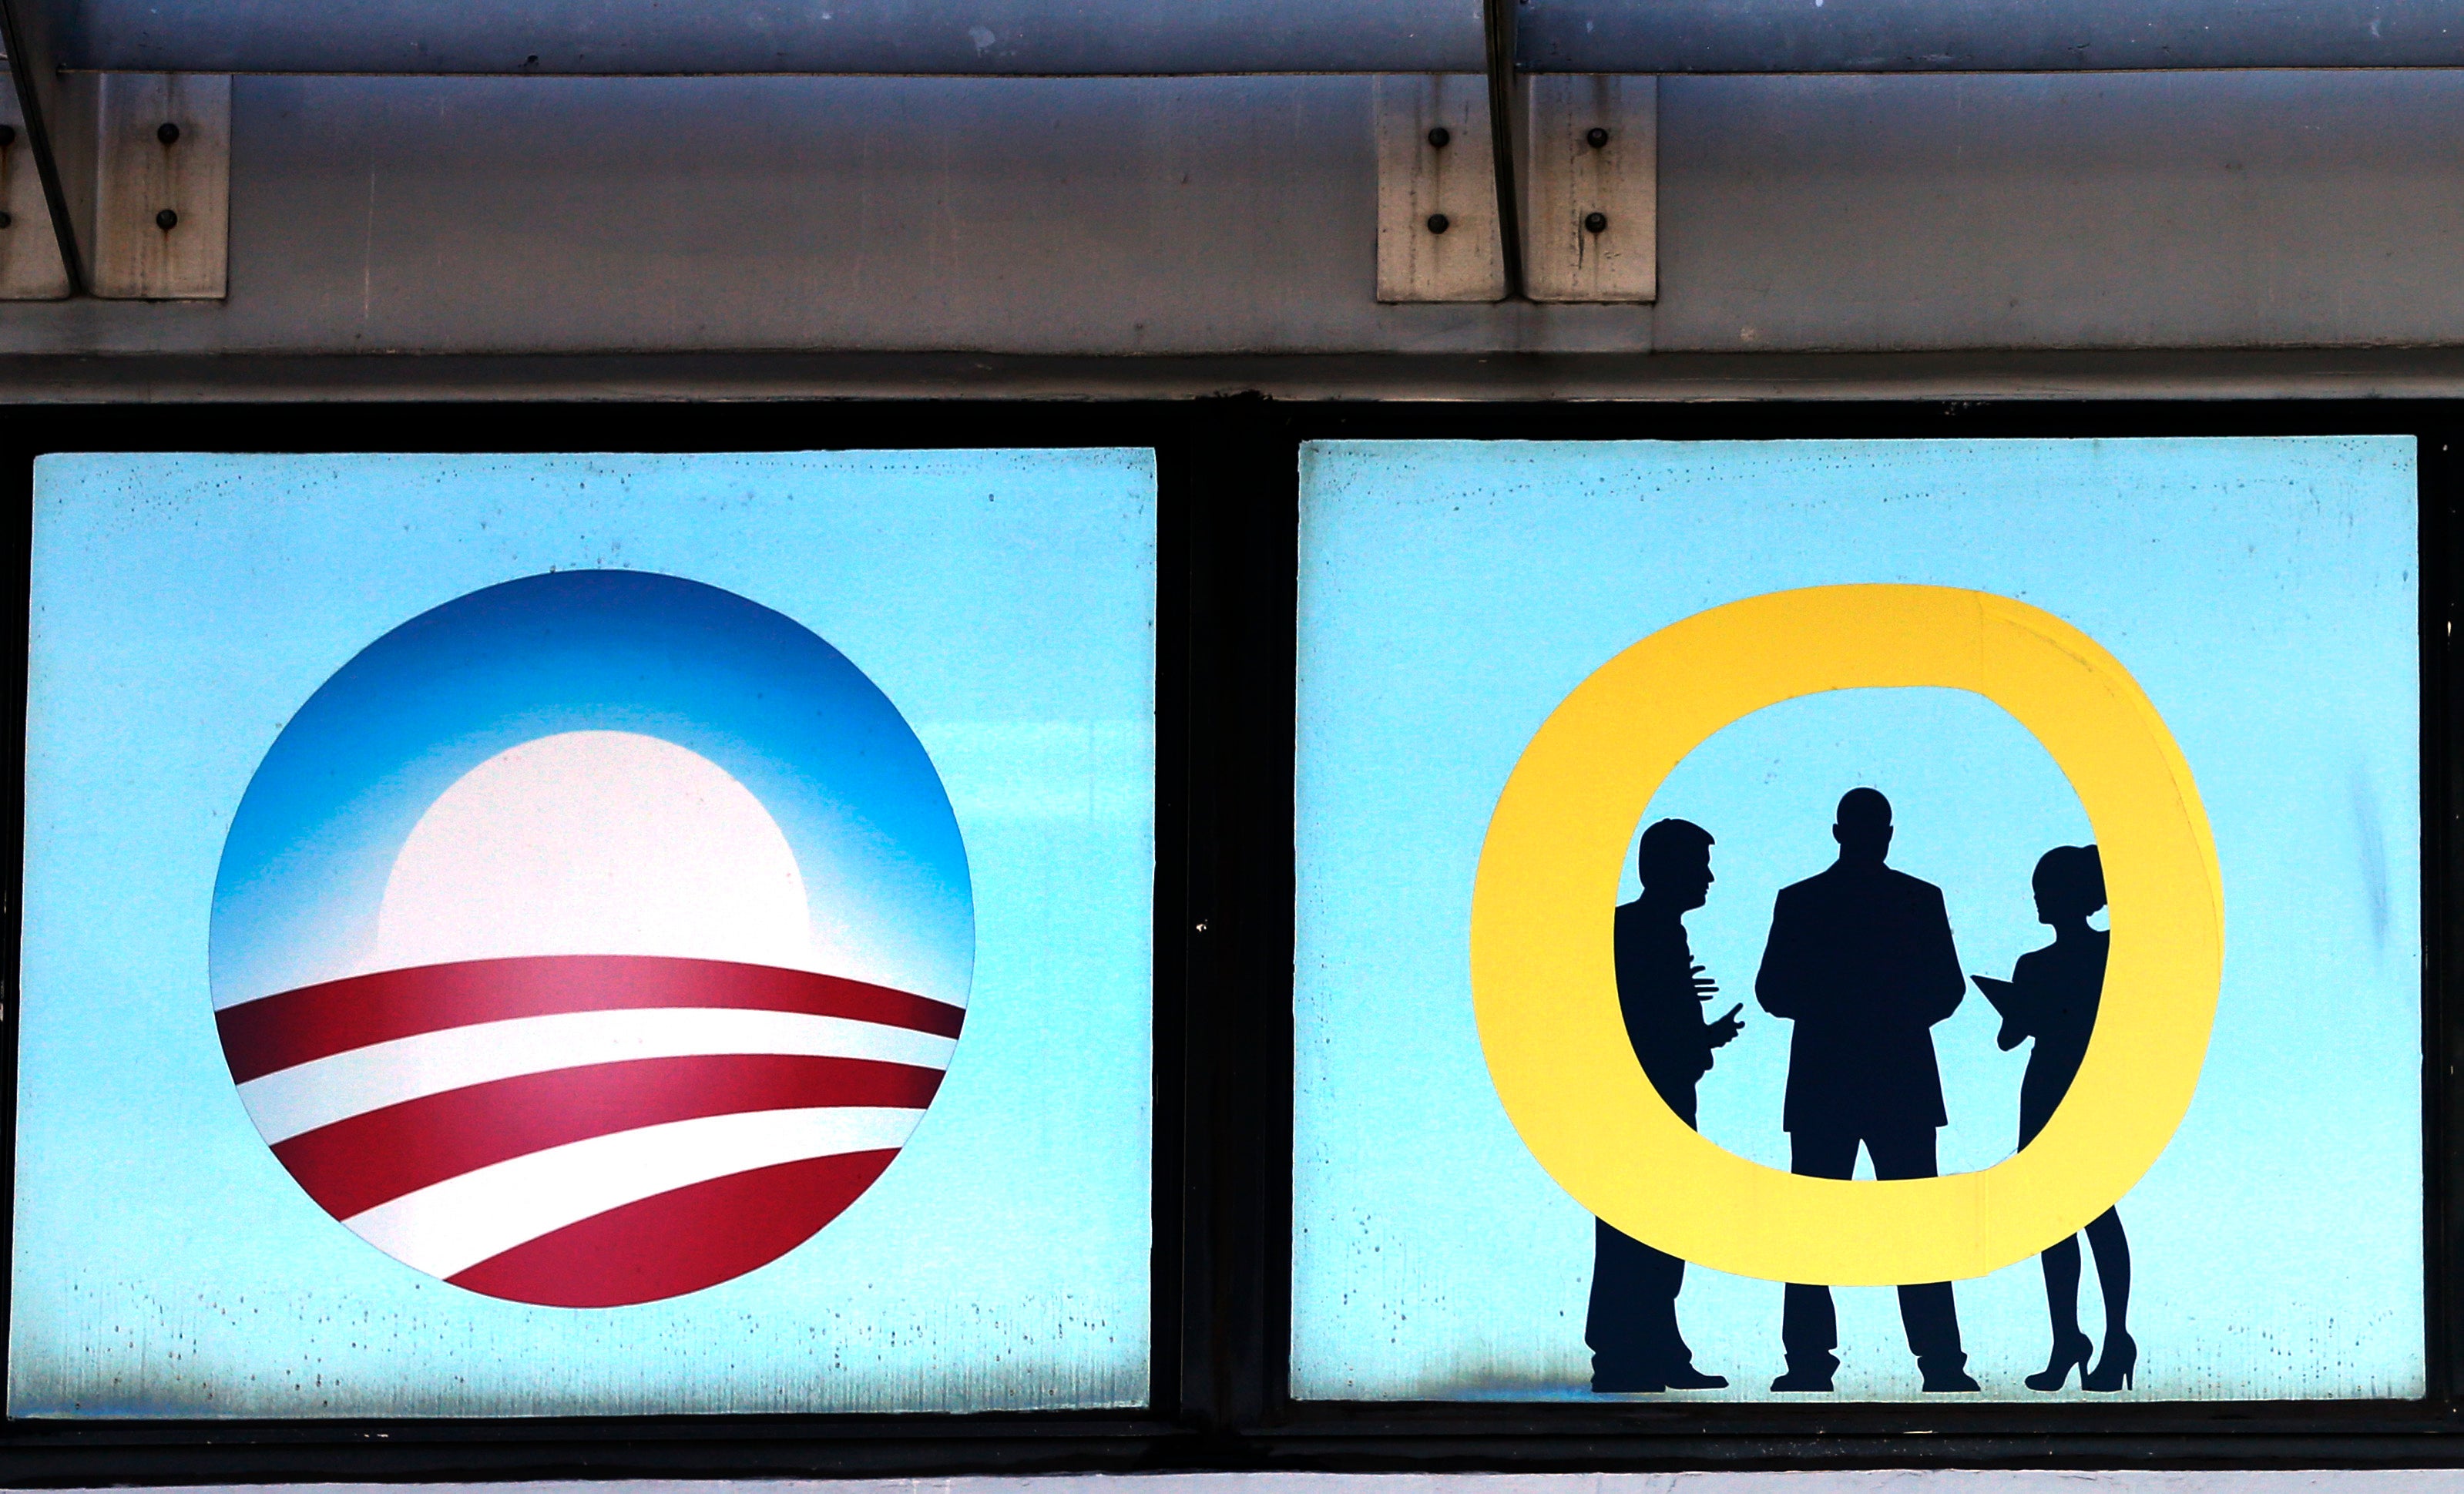 Poll: A Third of Americans Don't Know Obamacare and the Affordable Care Act Are the Same Thing
